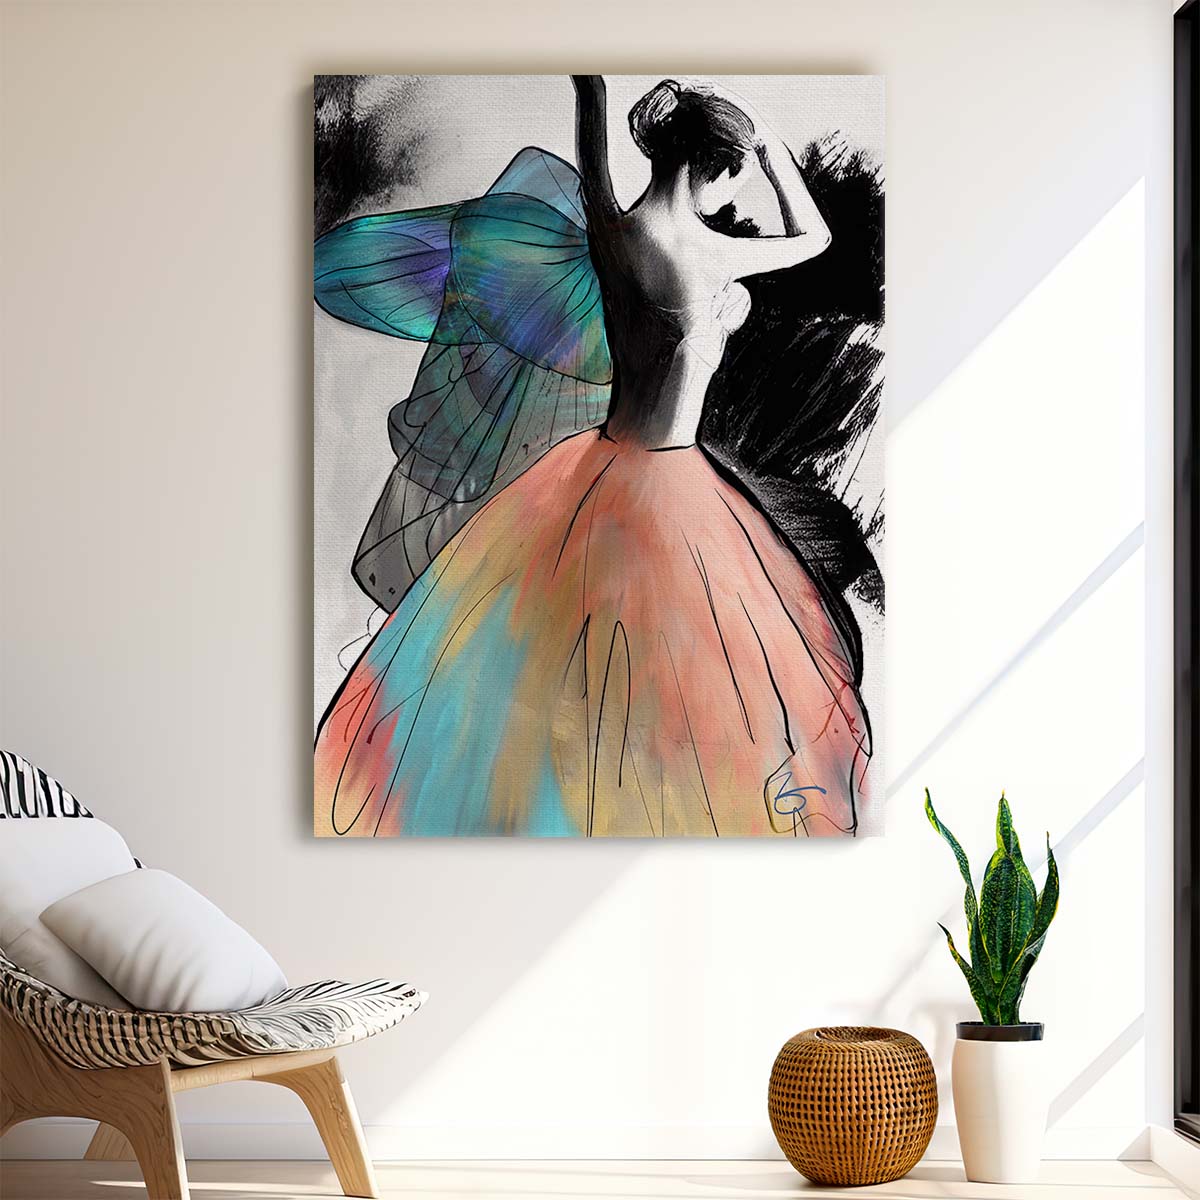 Colorful Fashion Dancer Illustration Wall Art by Ruth Day by Luxuriance Designs, made in USA